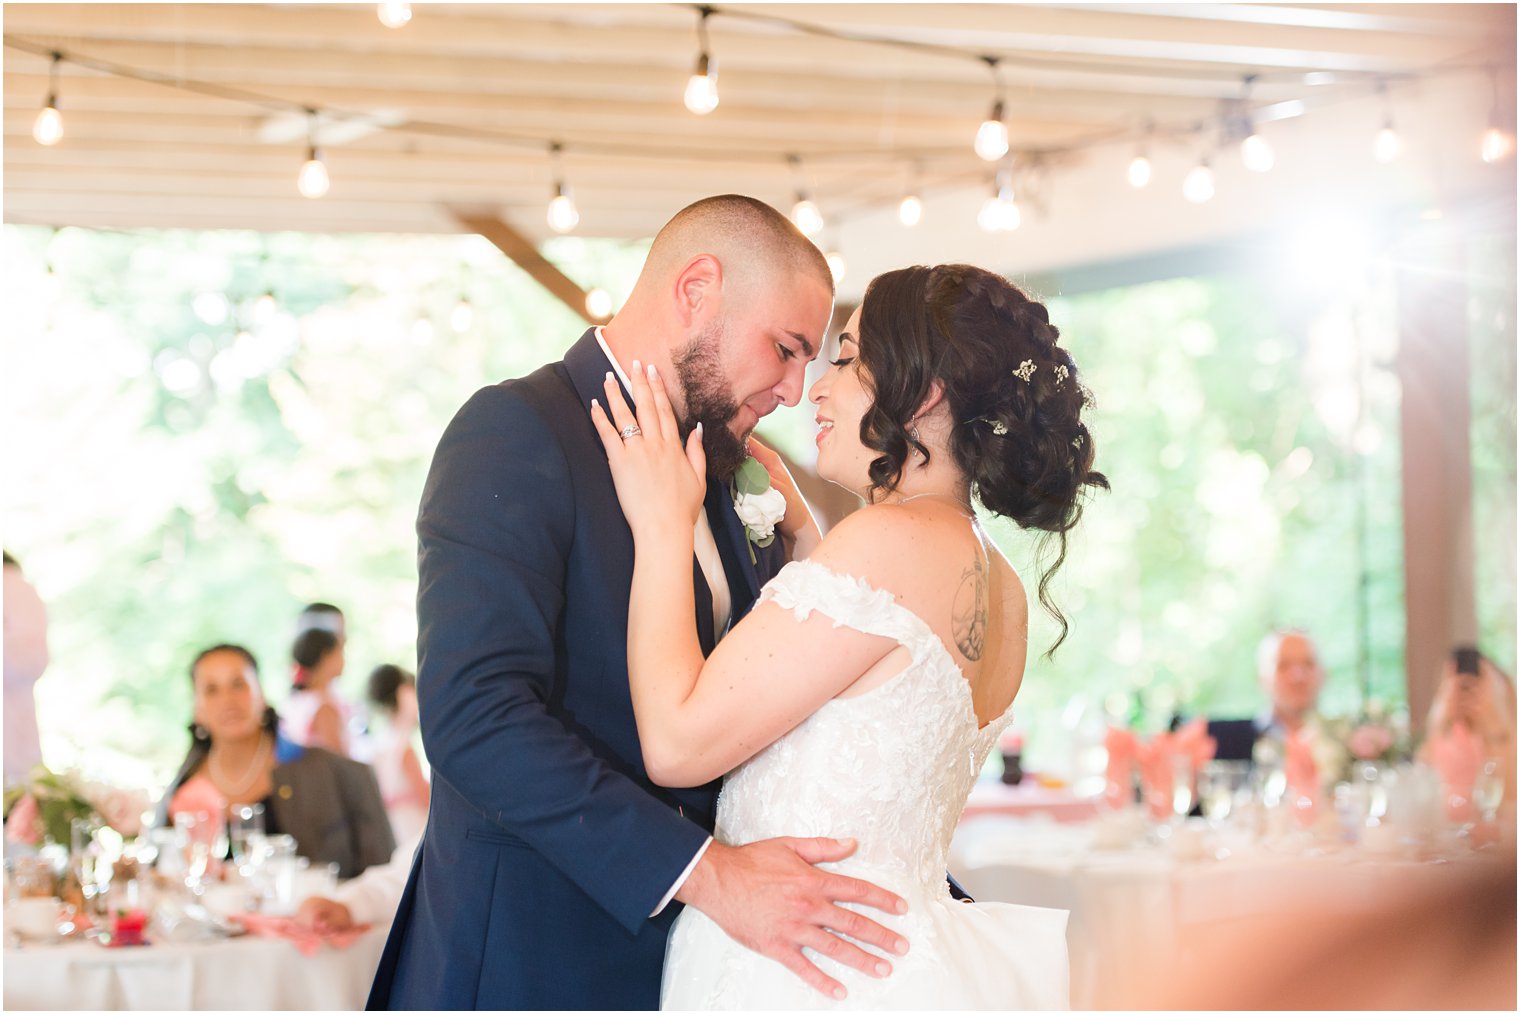 newlyweds dance together during Rutgers Gardens wedding reception 